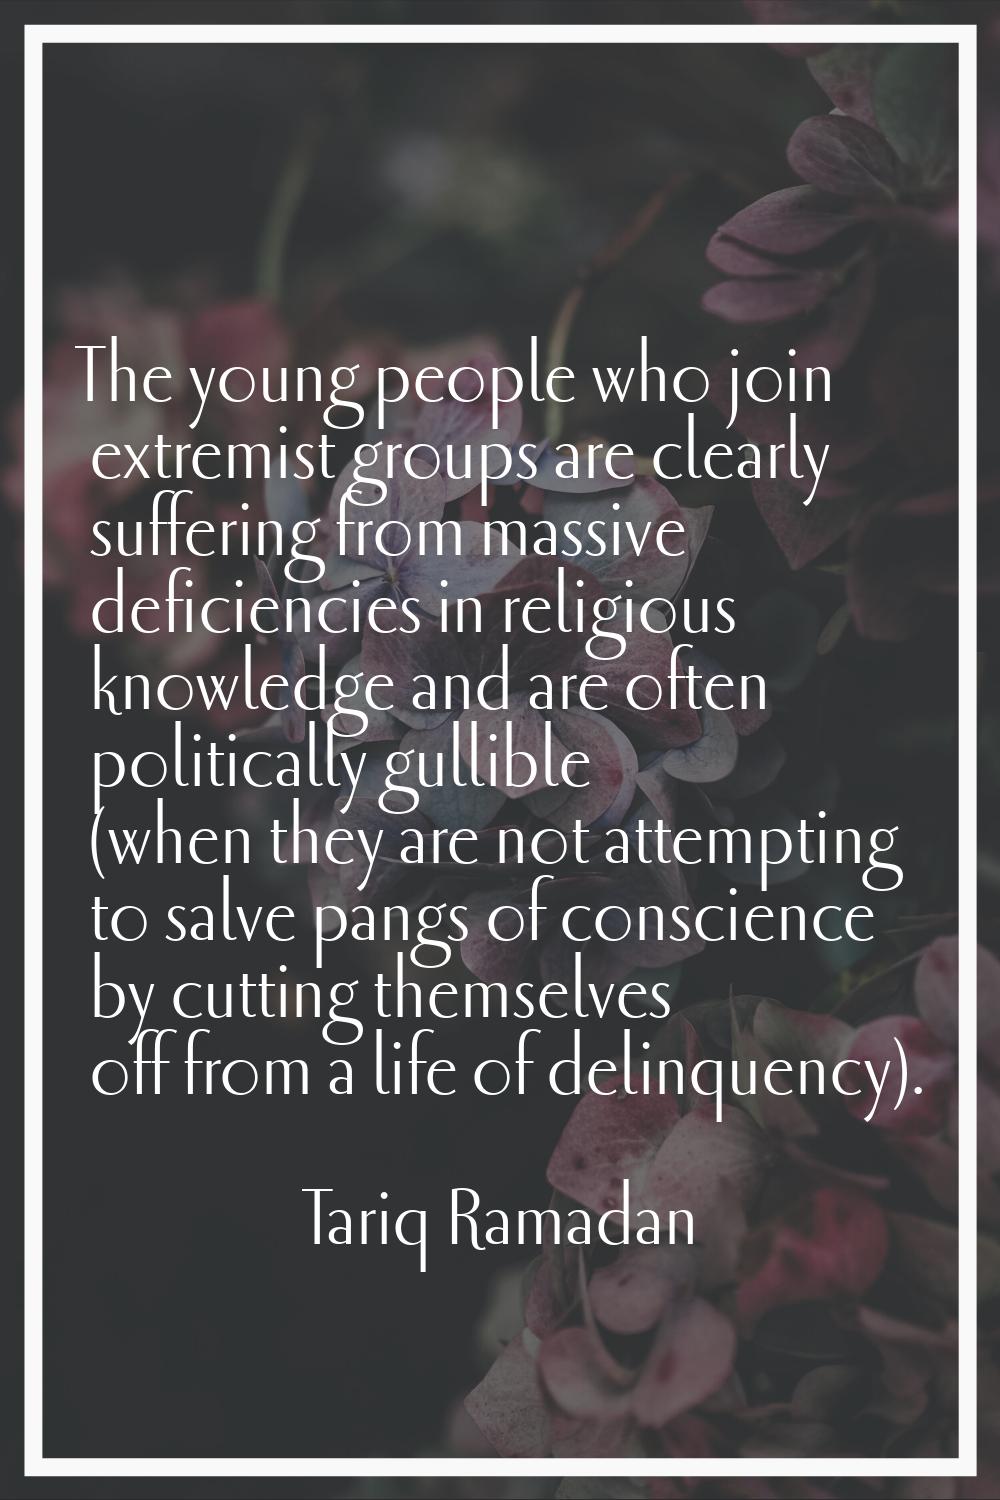 The young people who join extremist groups are clearly suffering from massive deficiencies in relig